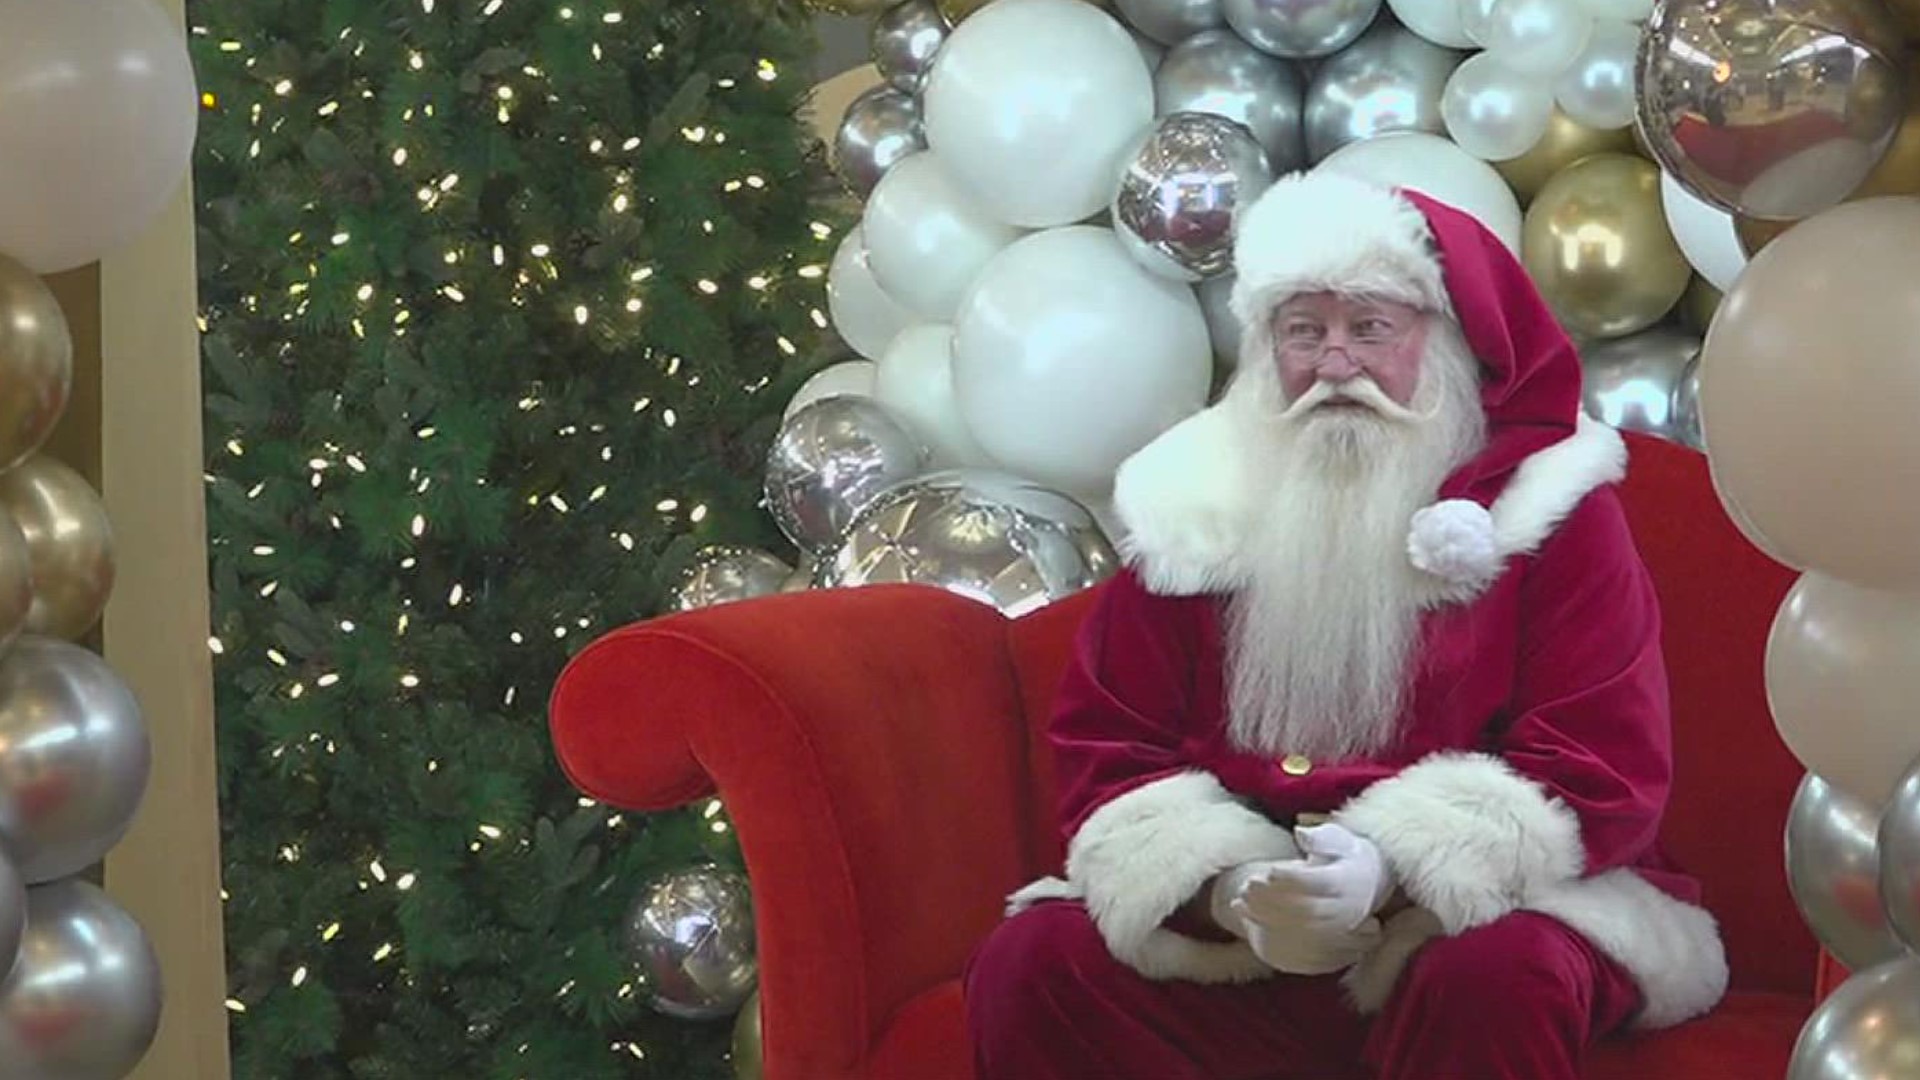 One family traveled all the way from Laredo, so their two sons could enjoy the one-on-one time with Ol’ Saint Nick in an environment tailored to their needs.